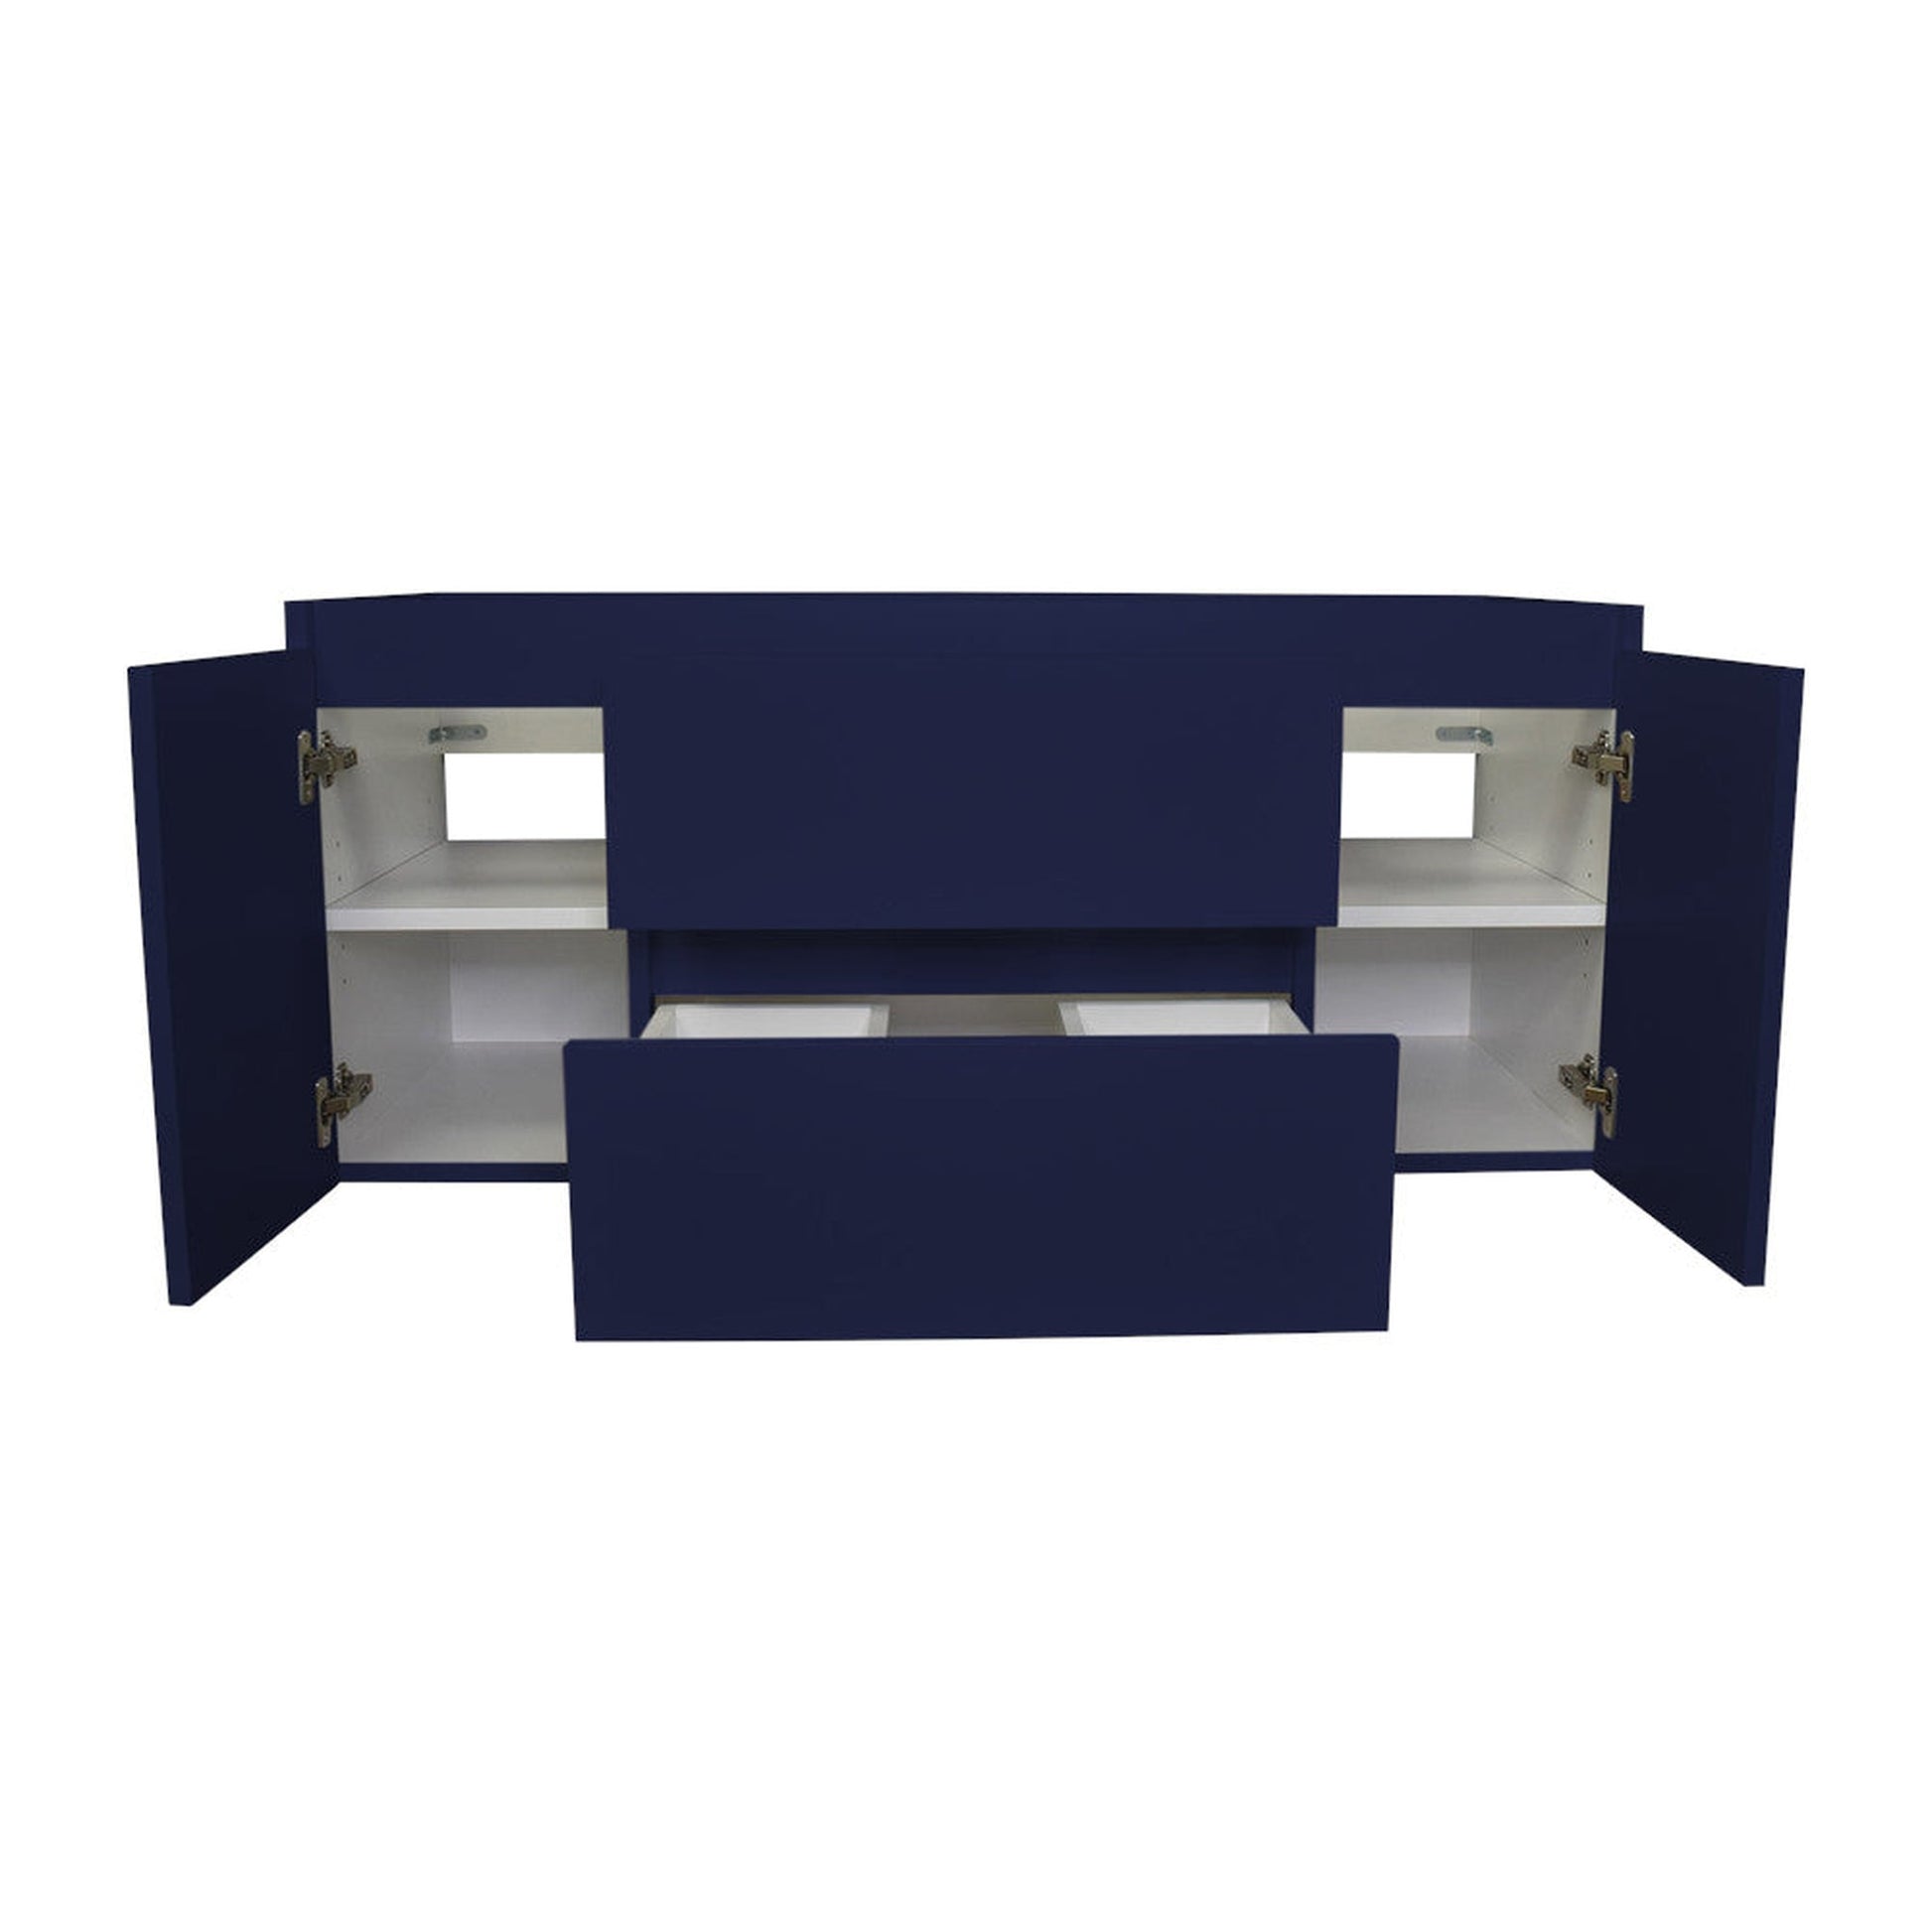 Volpa USA Salt 48" x 18" Navy Wall-Mounted Floating Bathroom Vanity Cabinet with Drawers